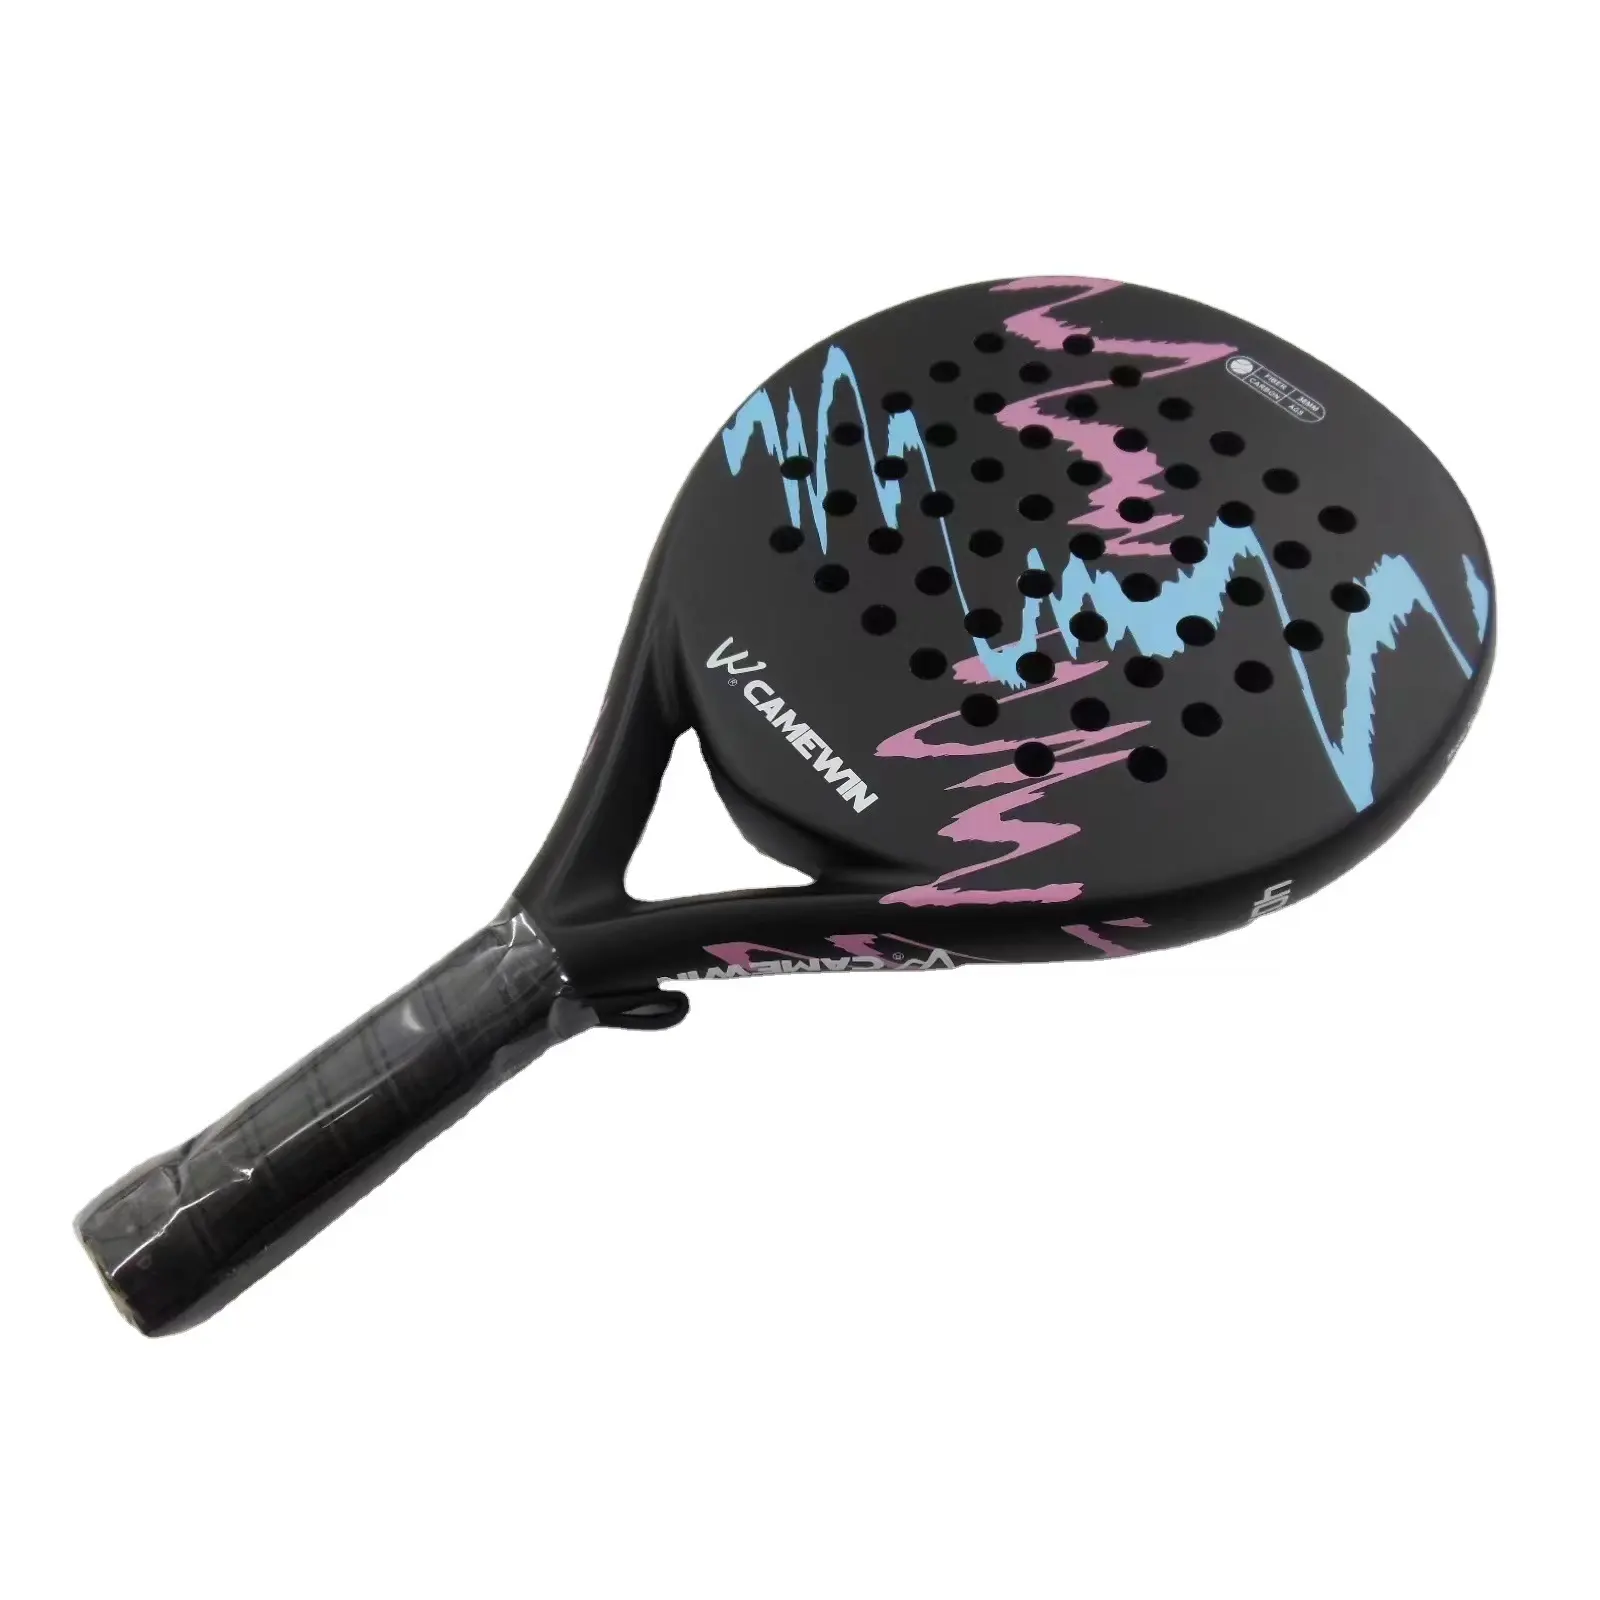 China factory manufacture high quality paddle tennis racket with 3K 12K 18K appearance and competitive price